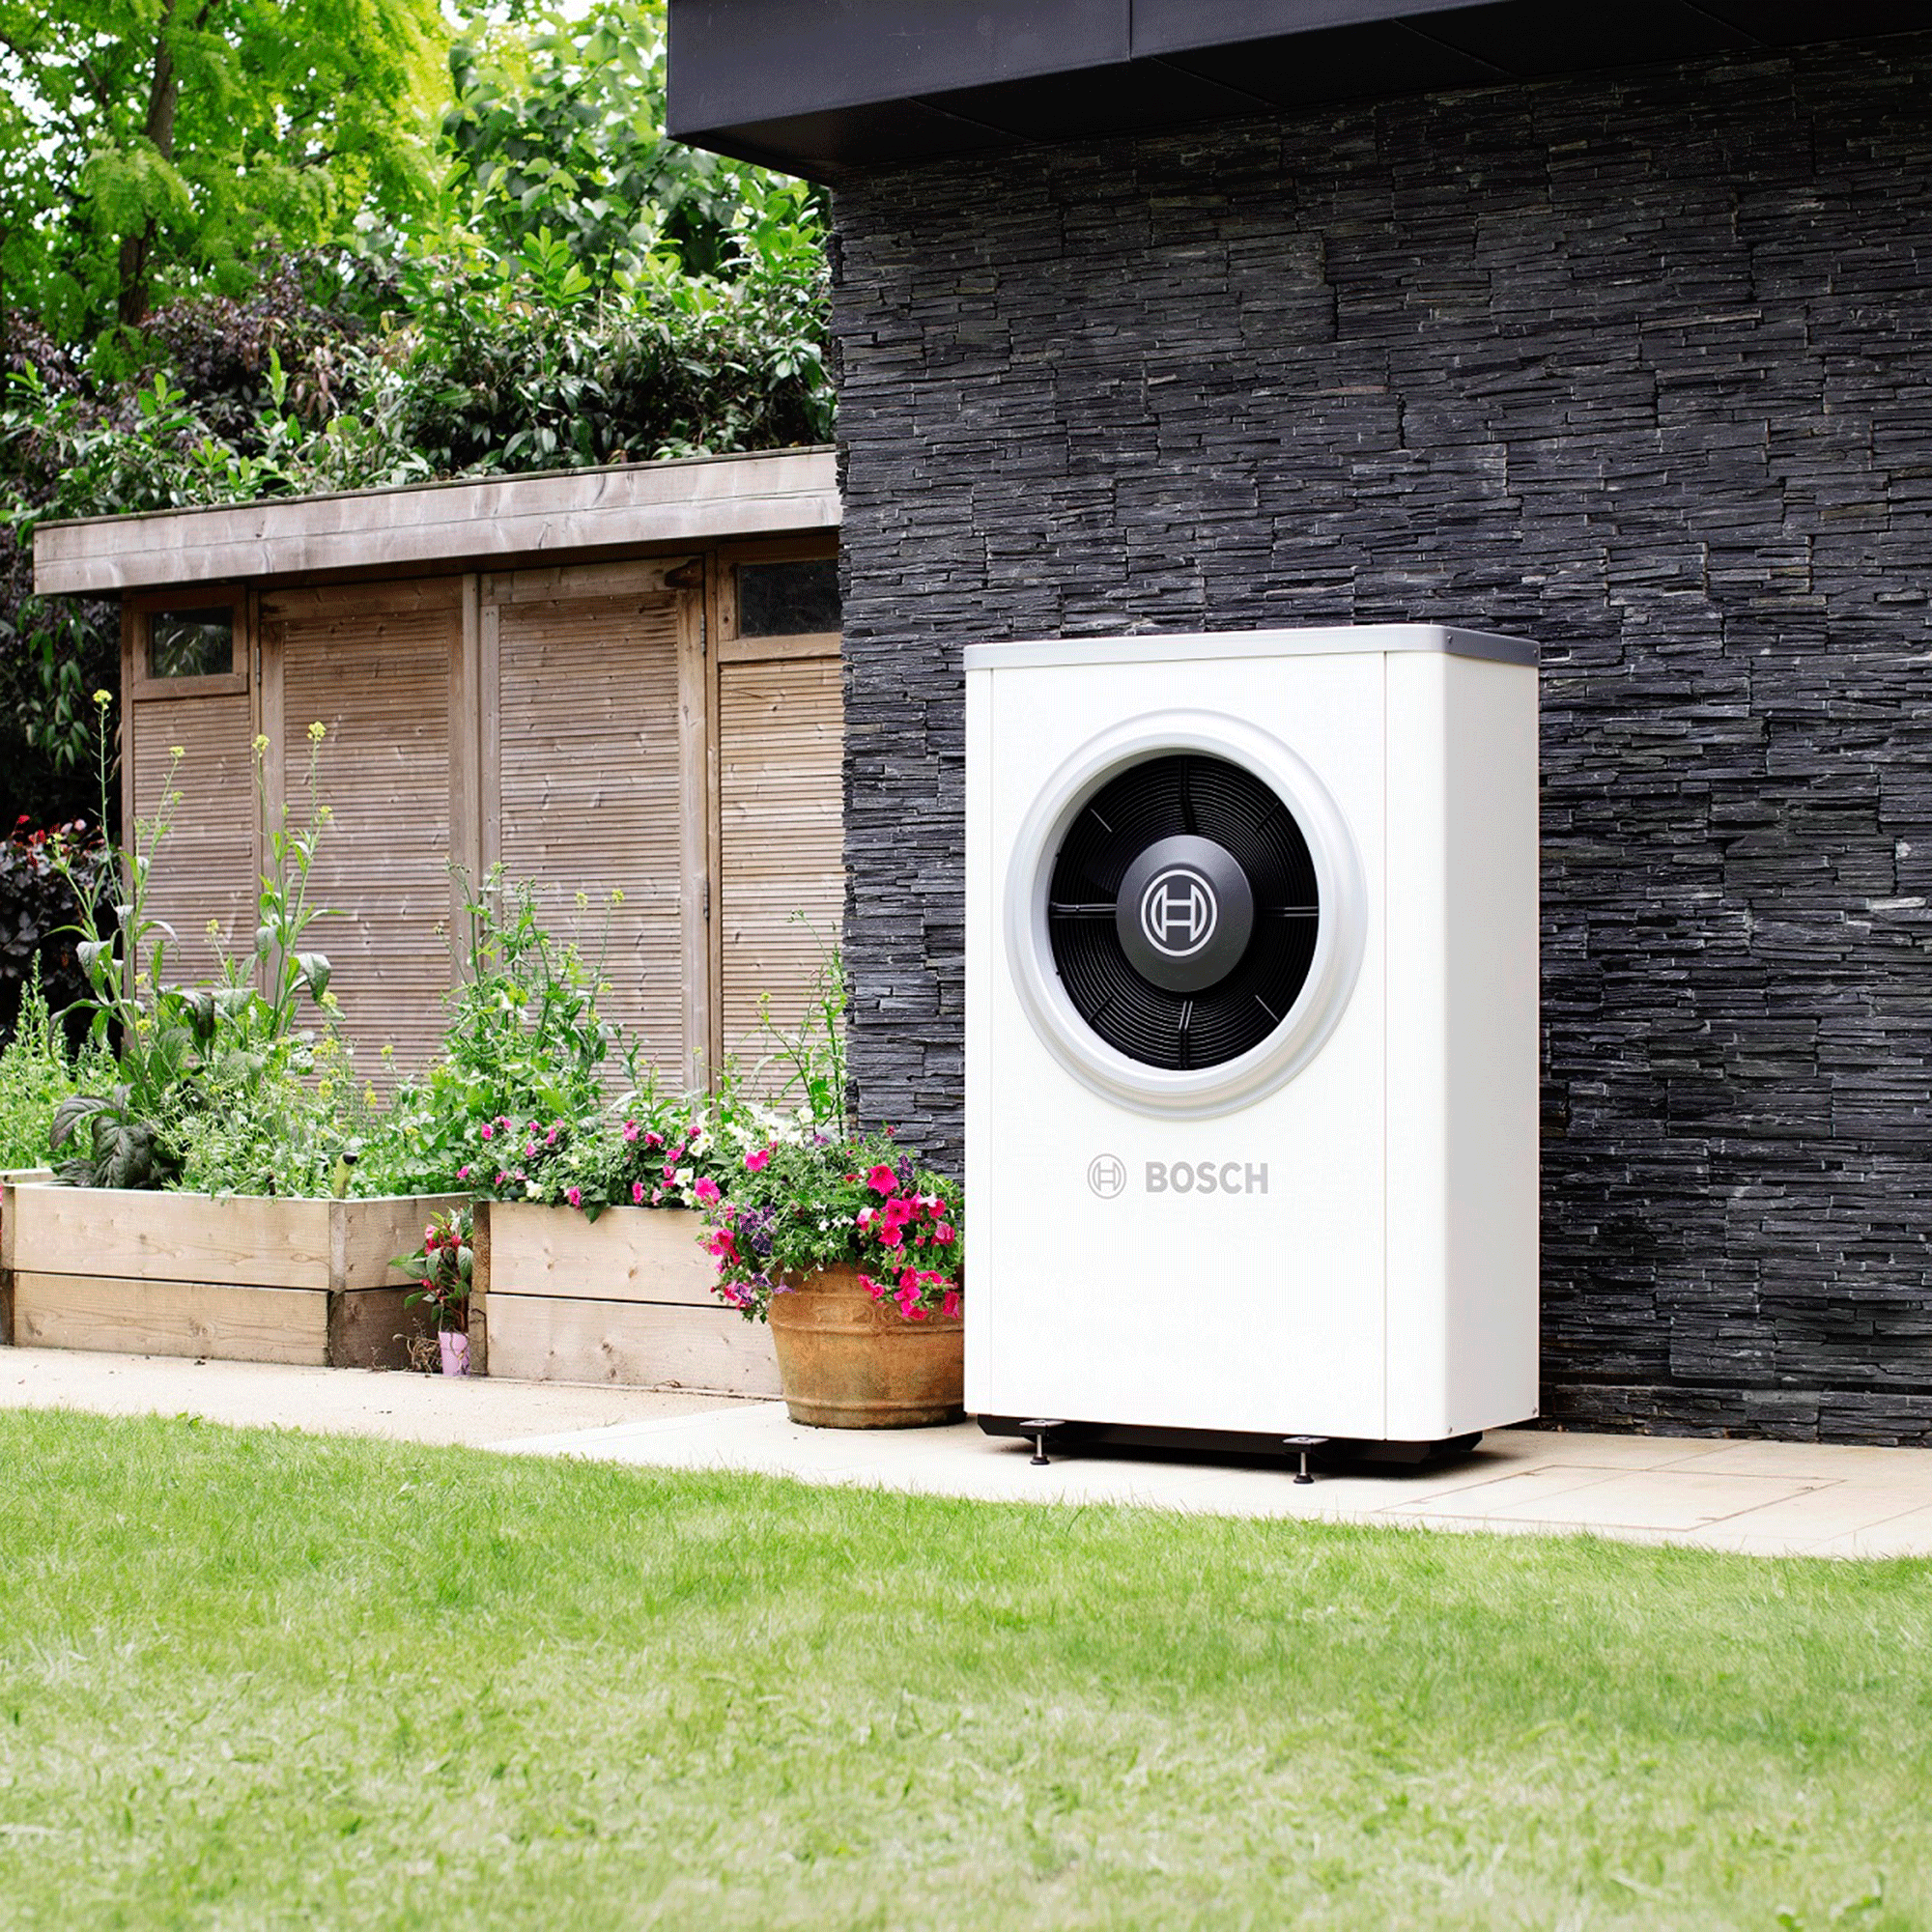 Heat pump outside black building with green lawn